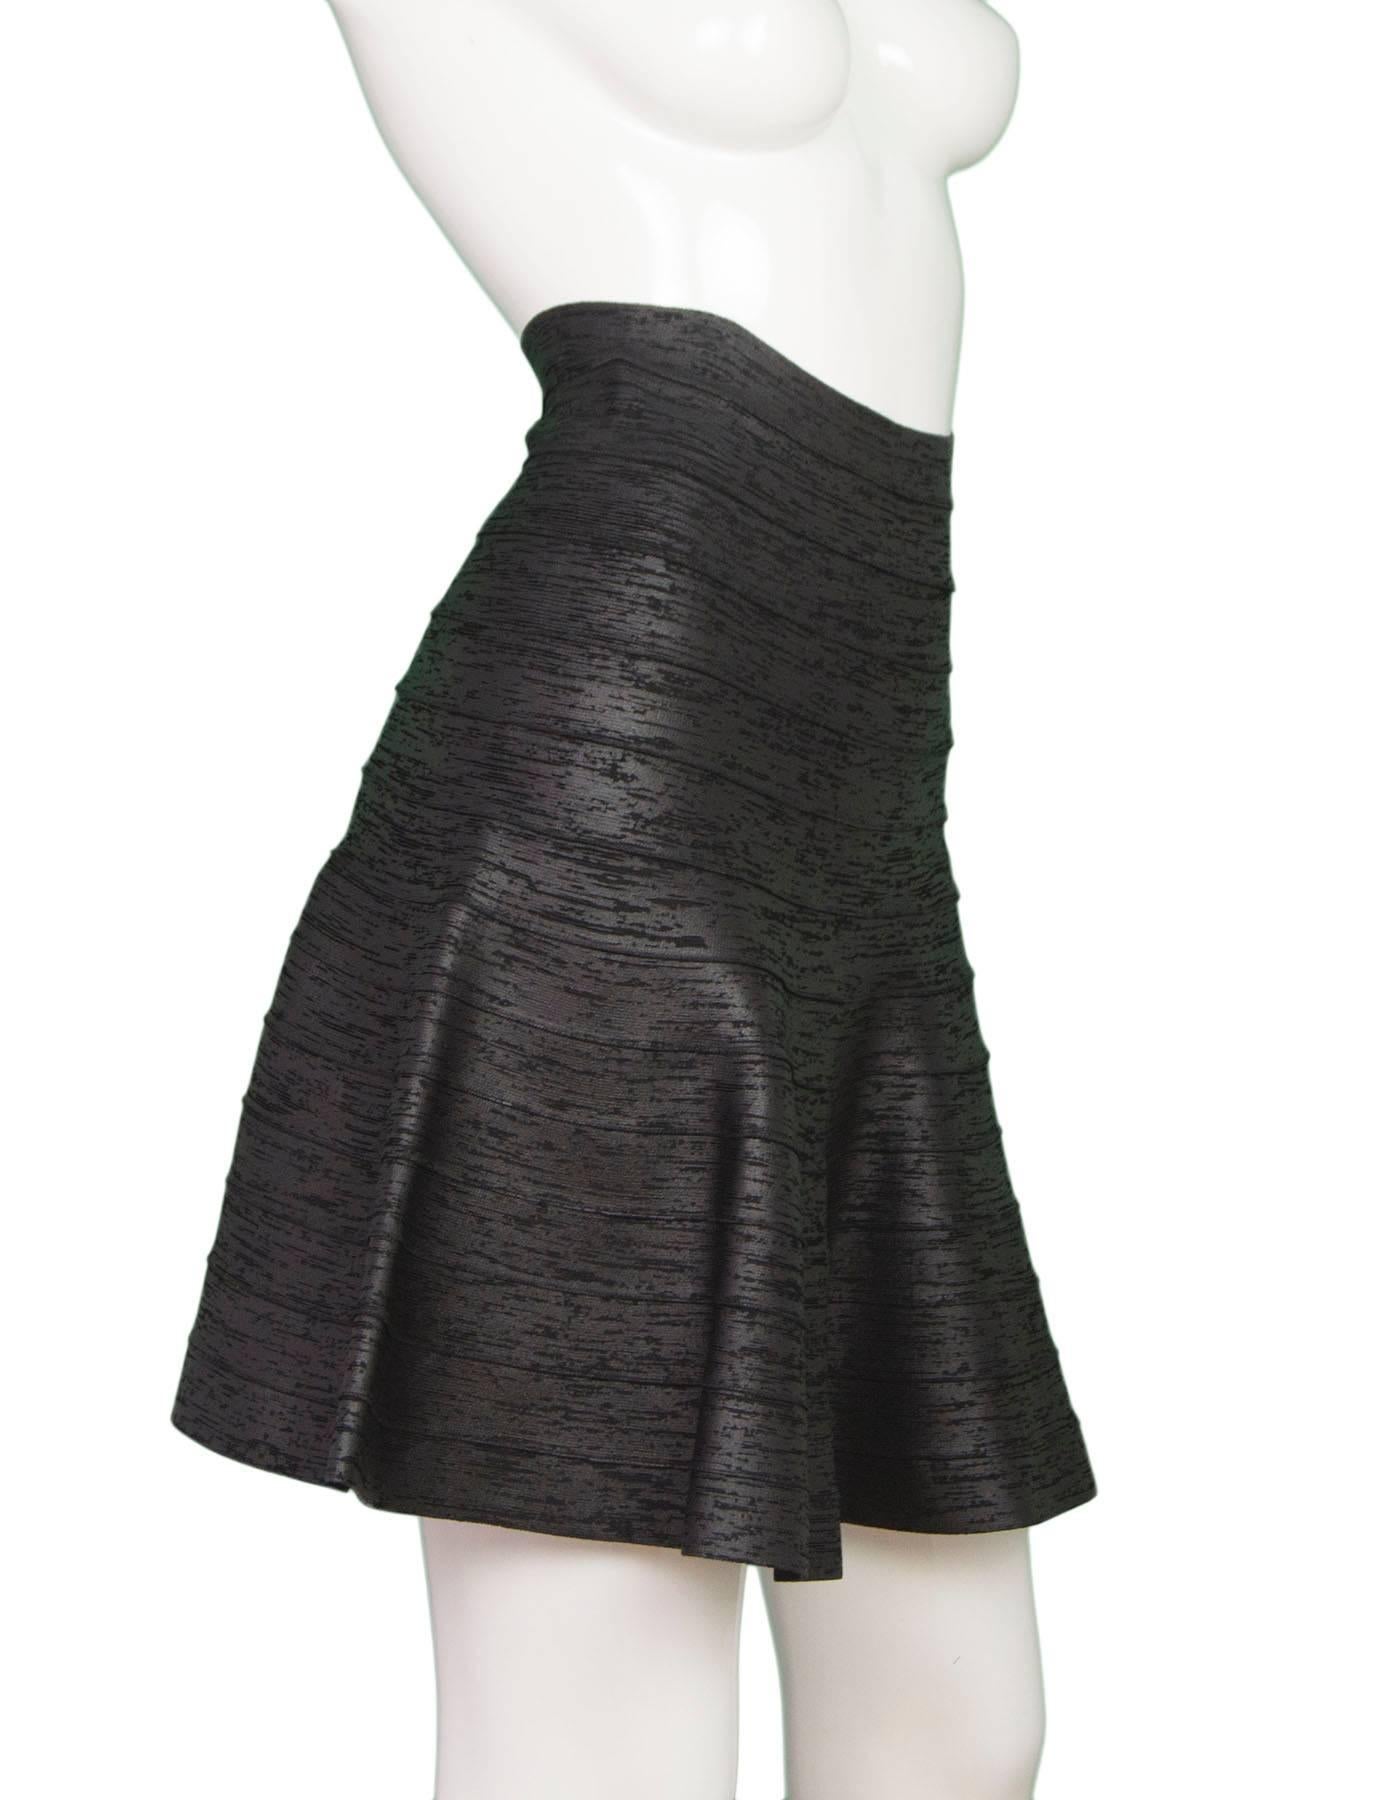 Herve Leger Iridescent Black A-Line Skirt 
Features bandage-style design with a-line shape

Made In: China
Color: Black
Composition: 90% rayon, 9% nylon, 1% spandex
Lining: None
Closure/Opening: Back center zipper closure with hook and eye